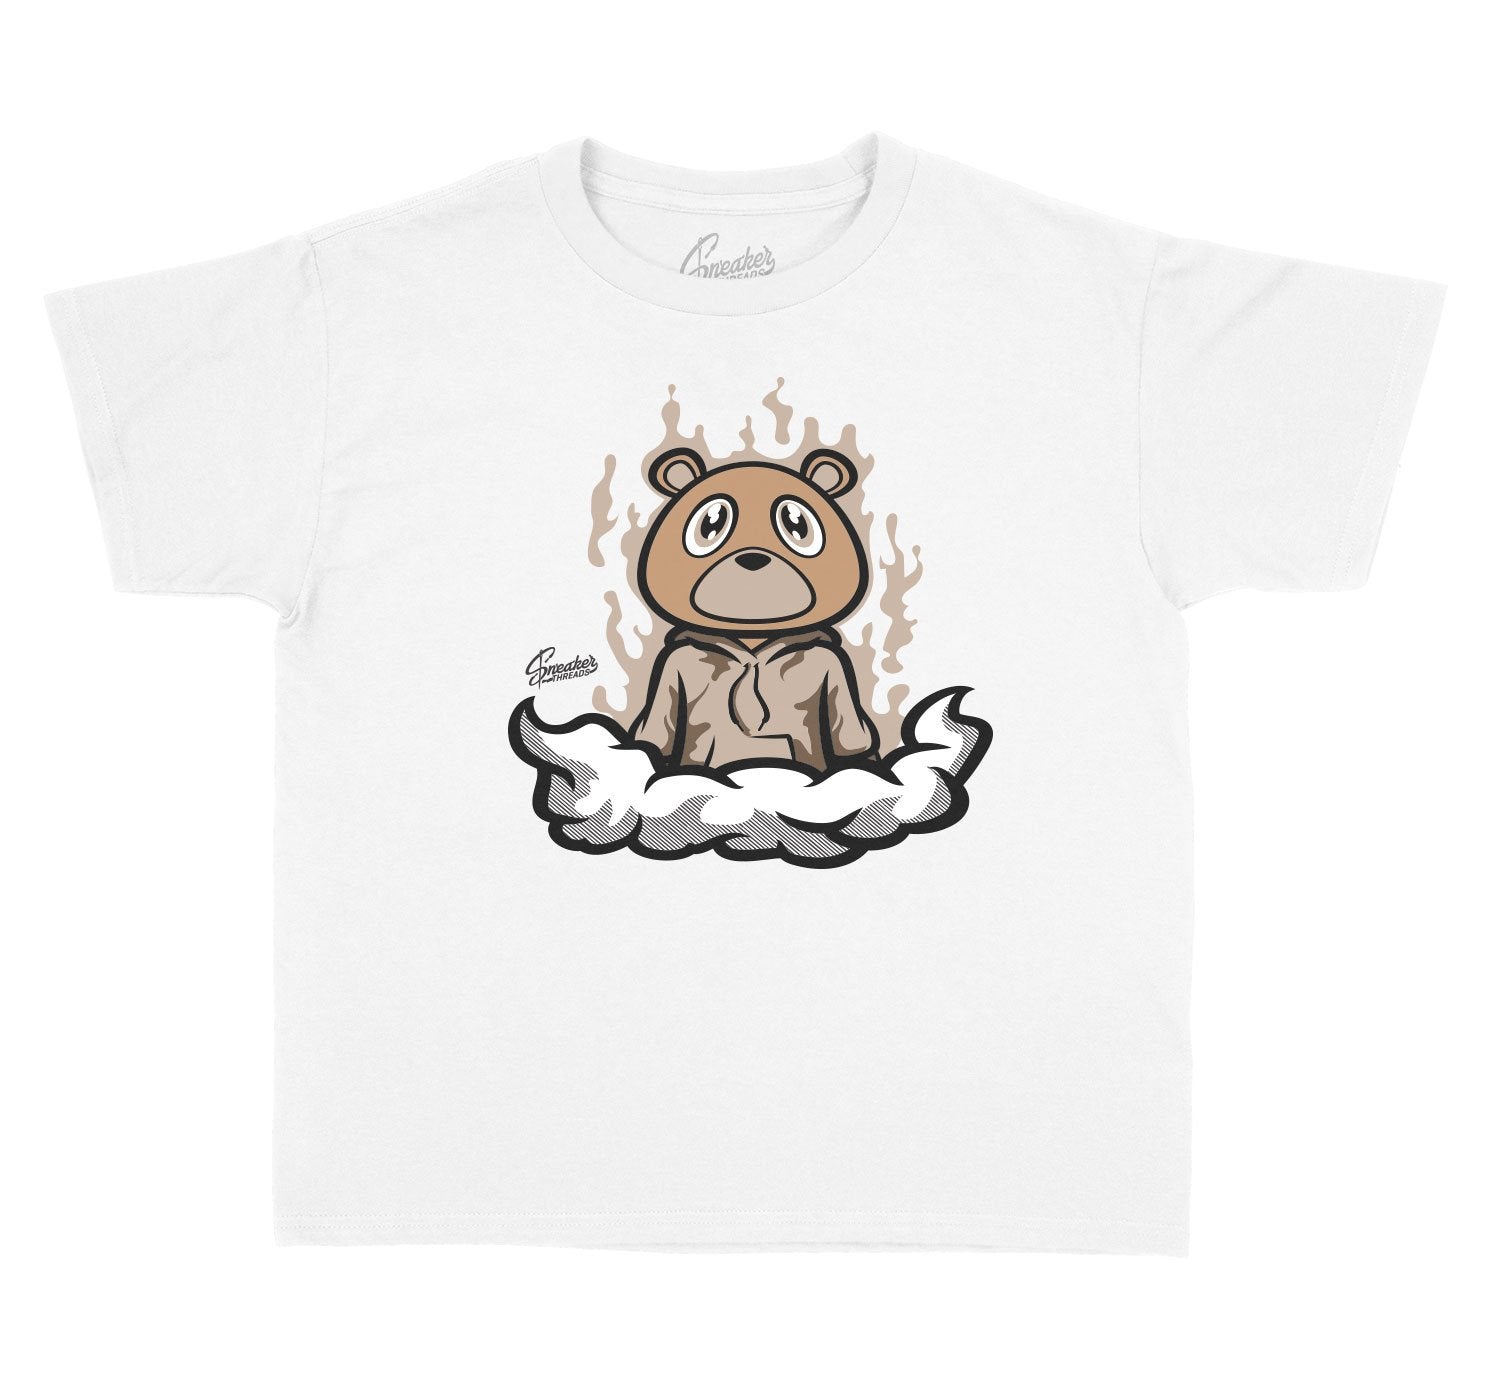 Cute Bear Kids Outfits to match with Yeezy 500 Stone